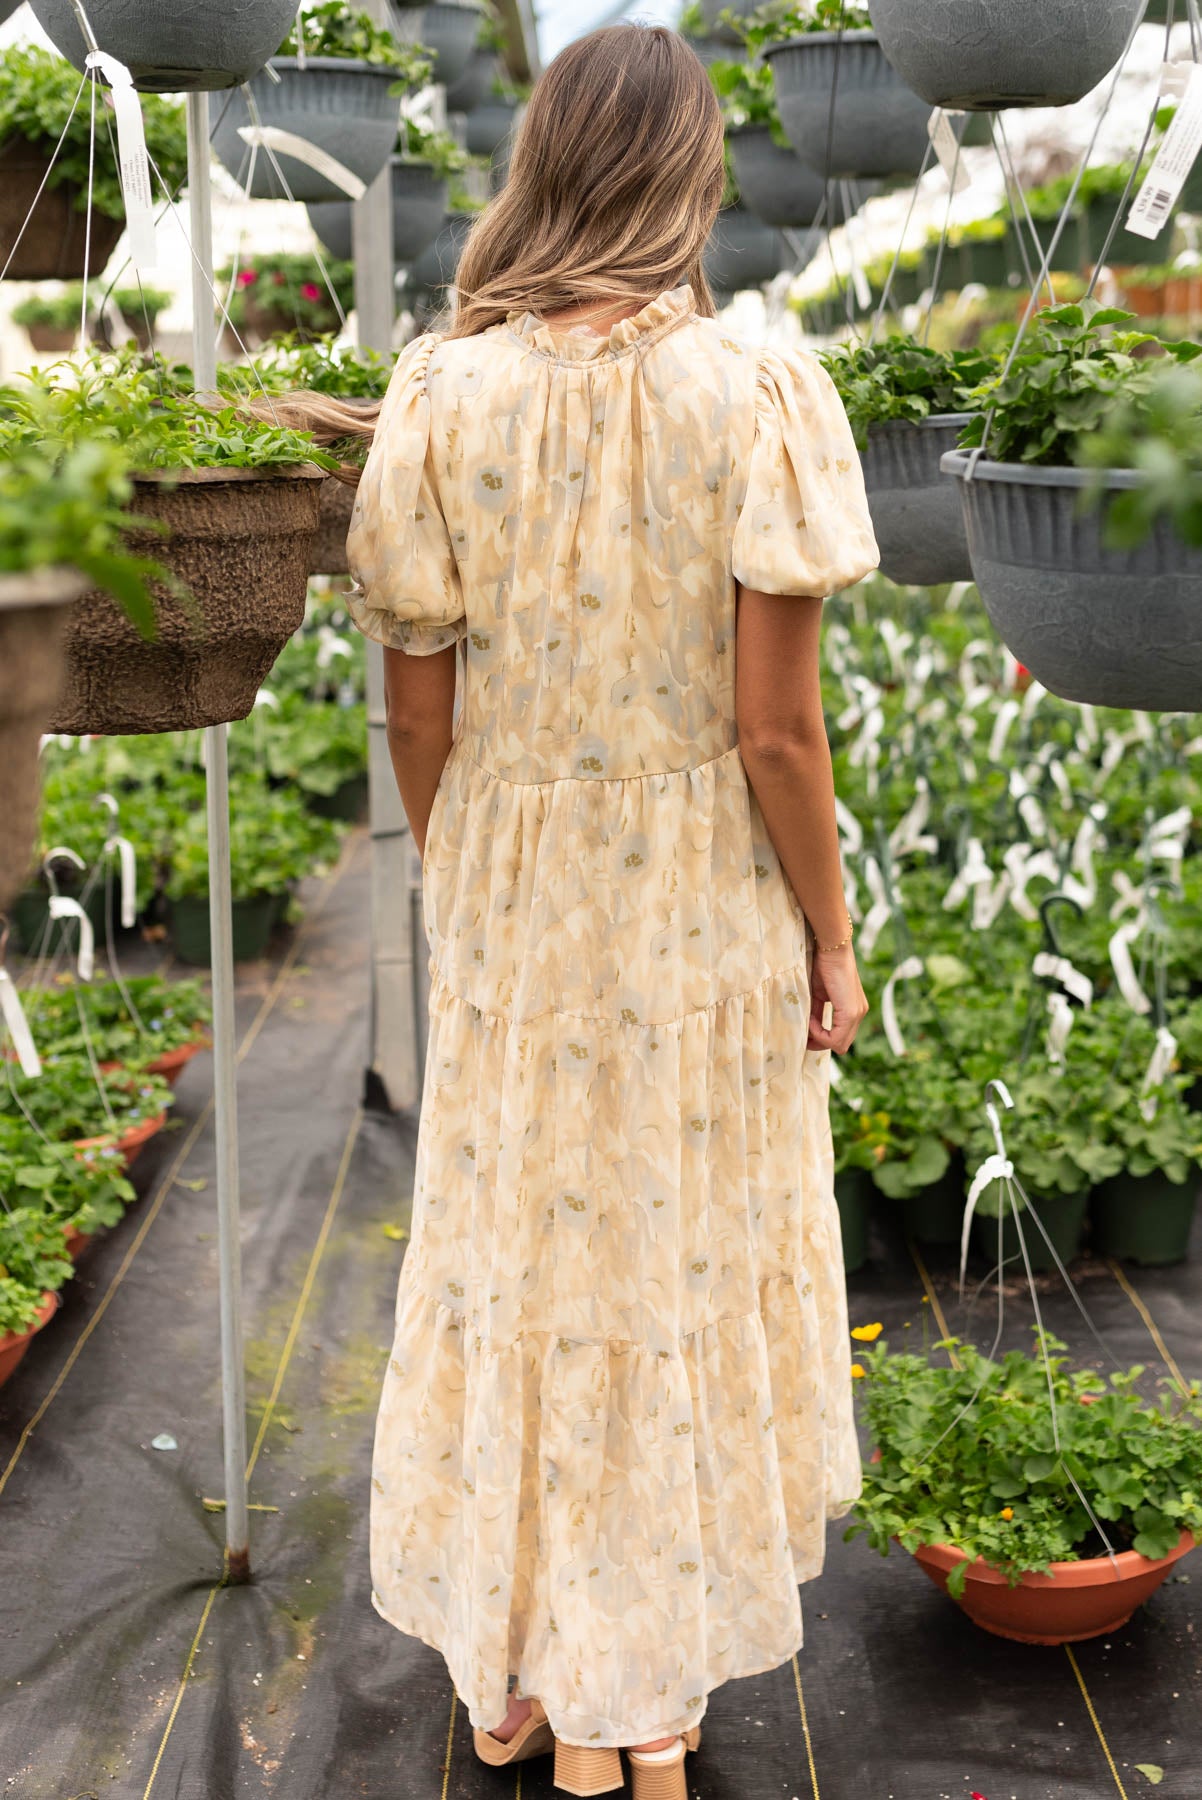 Back view of the tan pattern tiered dress 